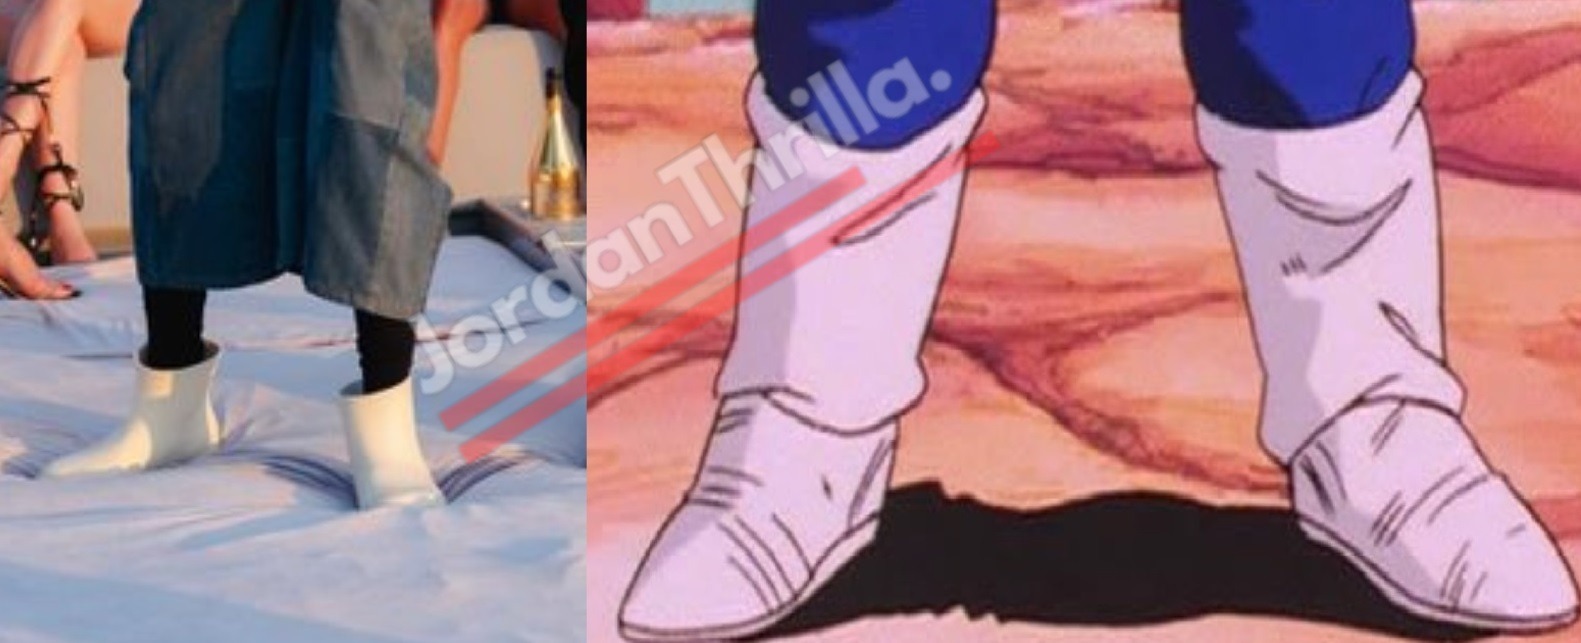 Lil Wayne Dragonball Z Shoes Are Going Viral For Looking Like Piccolo and Vegeta Sneakers. Lil Wayne Vegeta Sneakers